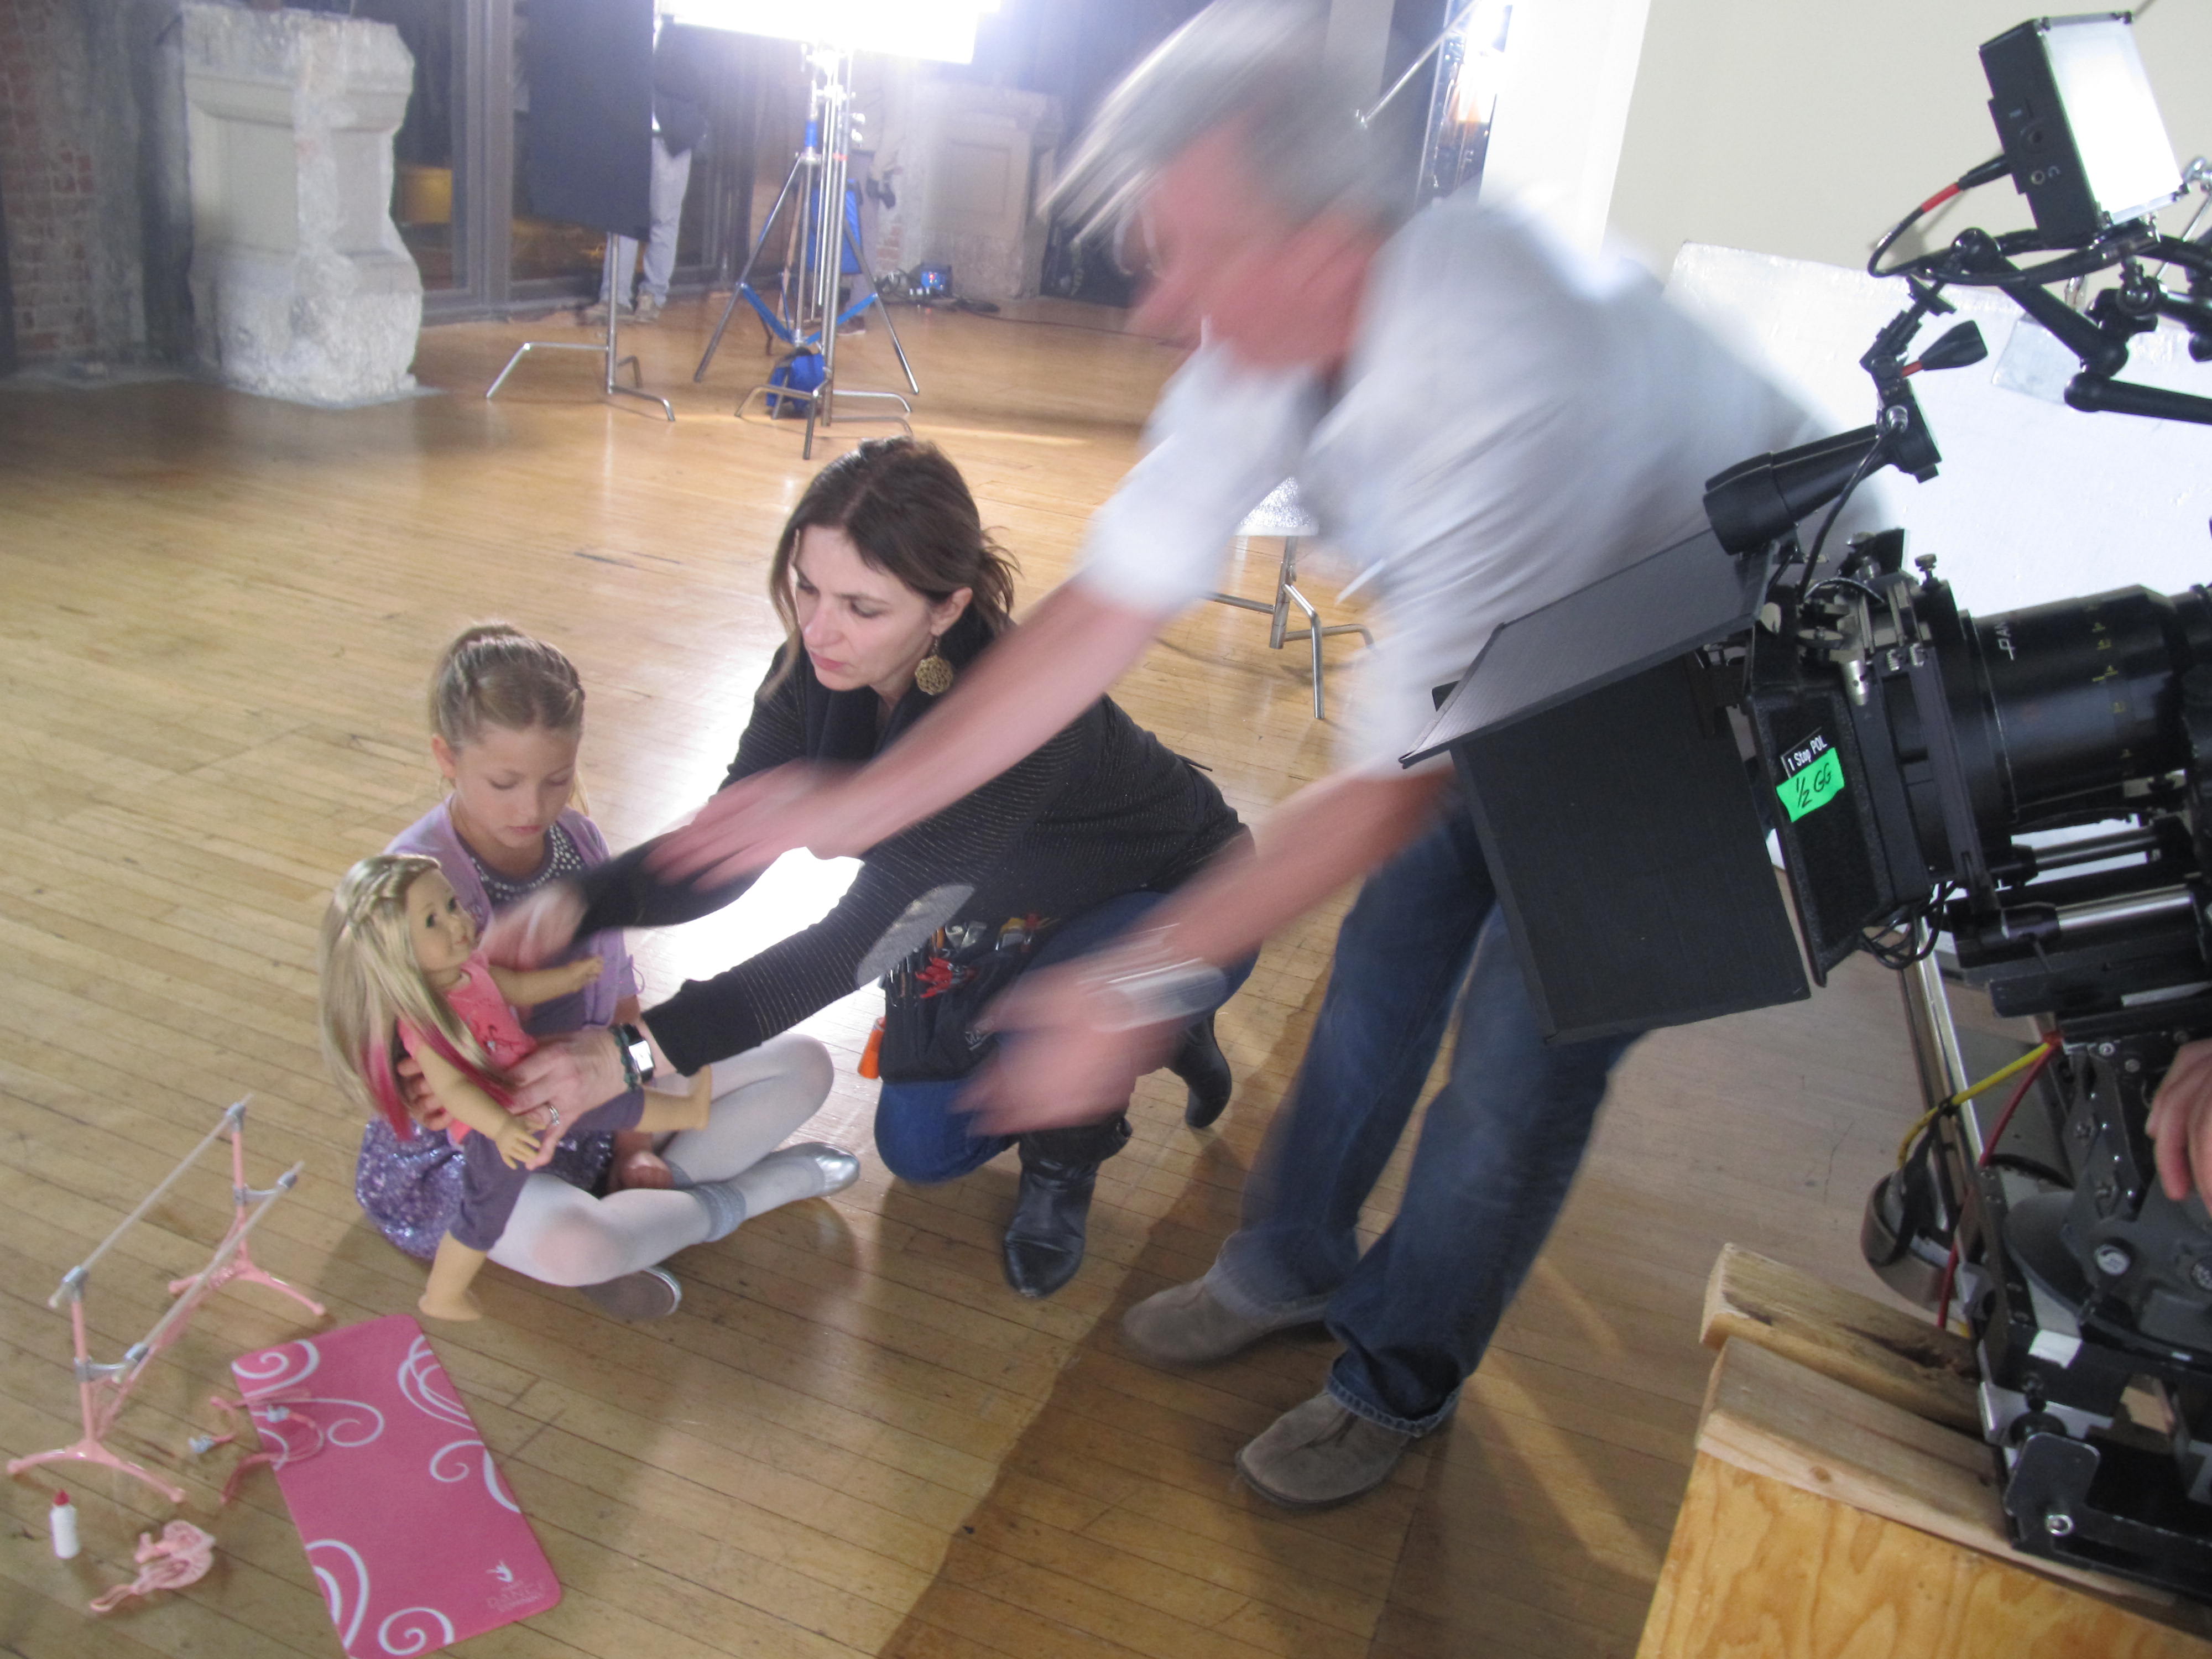 Ryan preparing for a close-up at AMERICAN GIRL - Isabelle, Girl of the Year 2014 doll commercial (Dec. 2013).